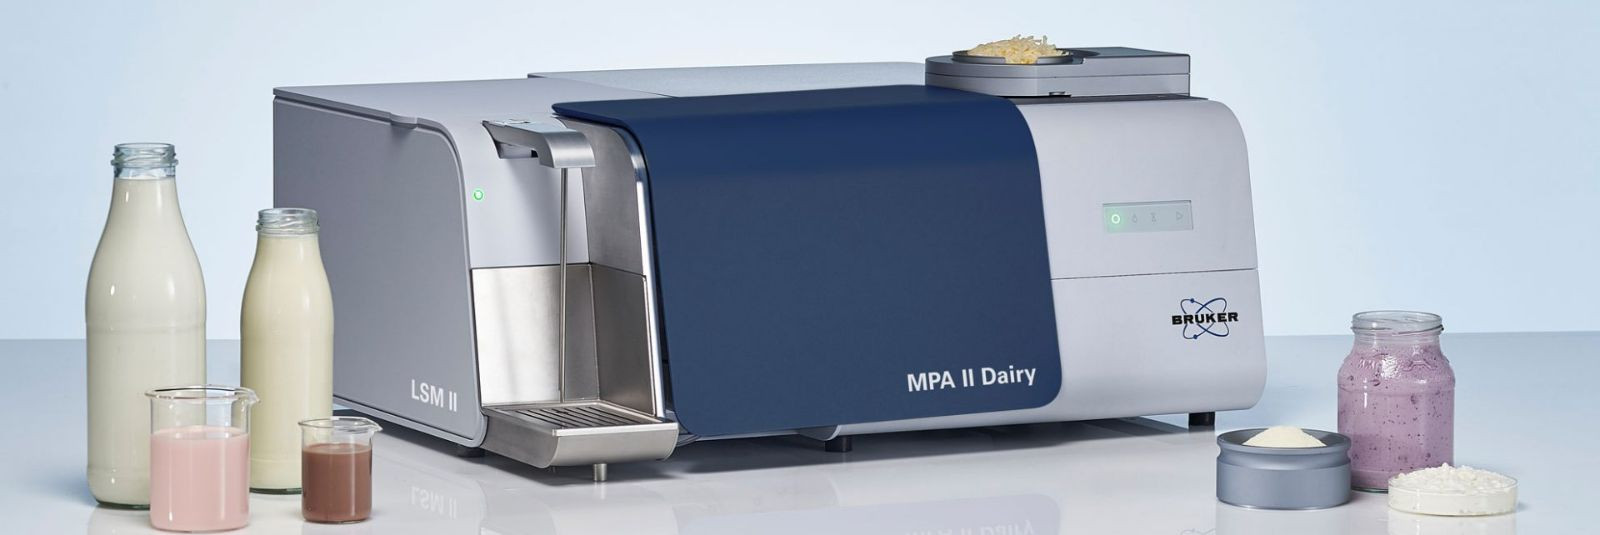 Bruker Optic announces the launch of the LSM II (Liquid Sampling Module), a reliable, fast, and cost-effective solution for the quality control (QC) of milk and